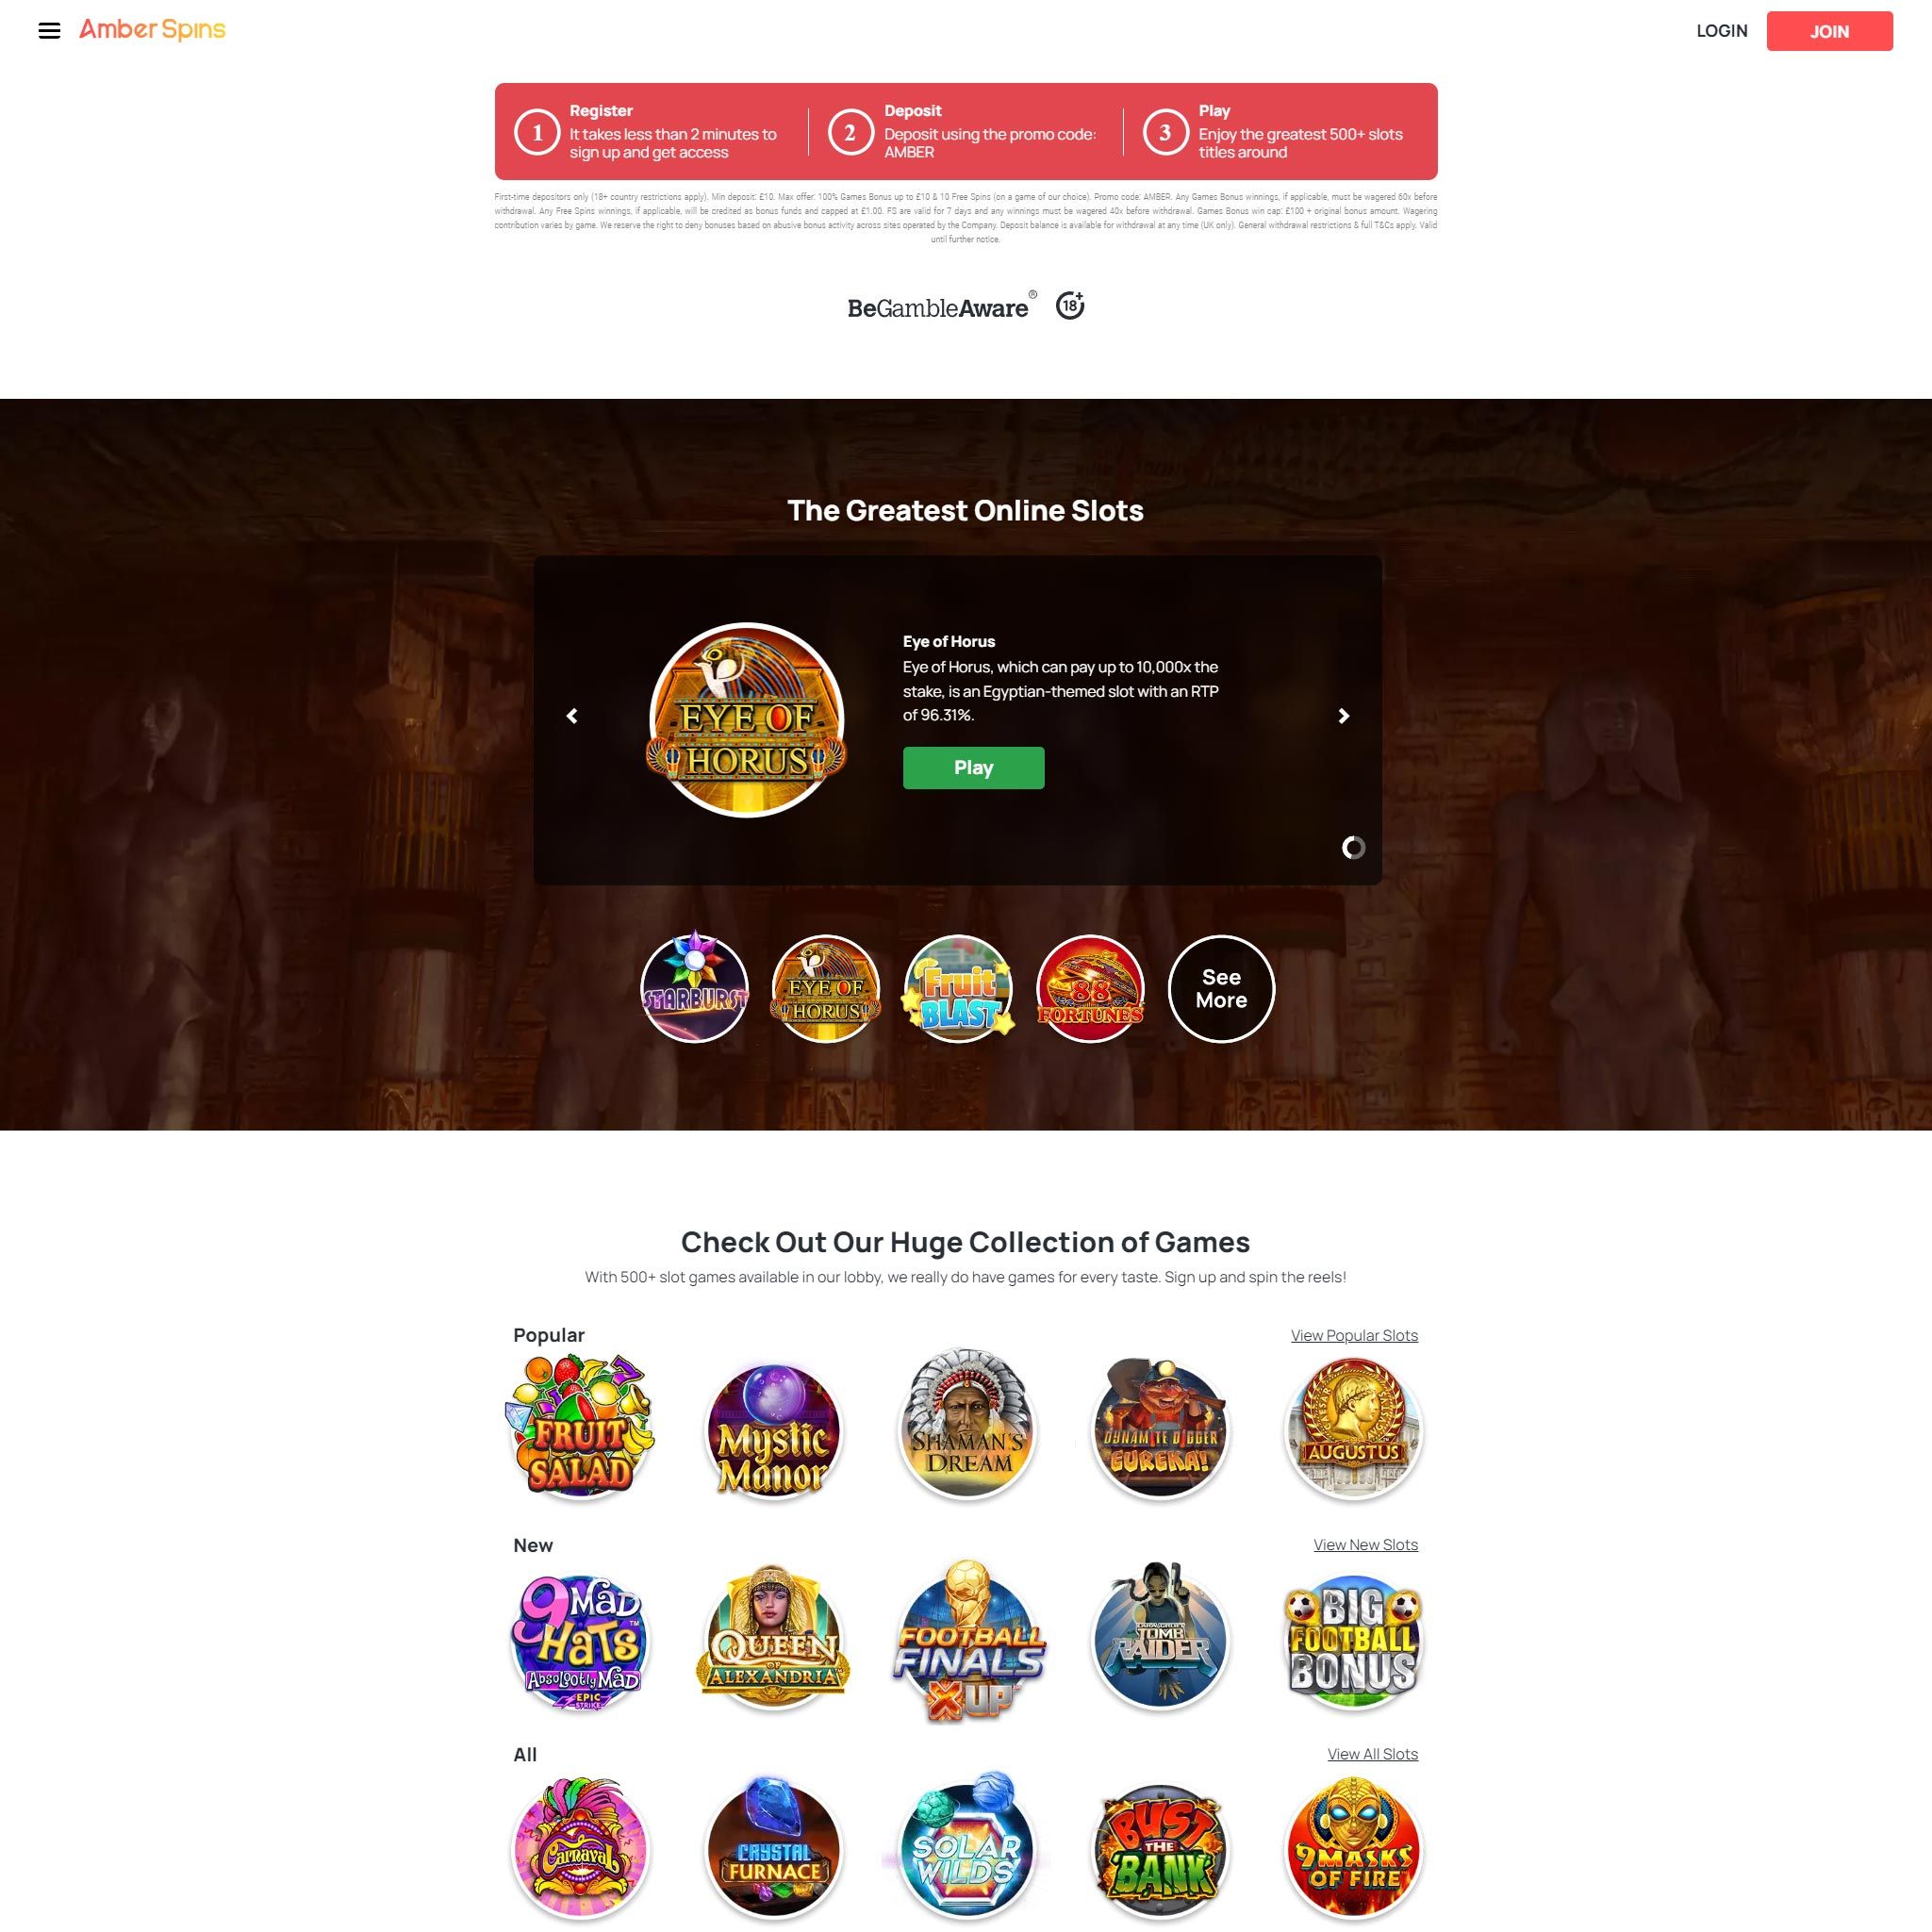 Amber Spins Casino UK review by Mr. Gamble